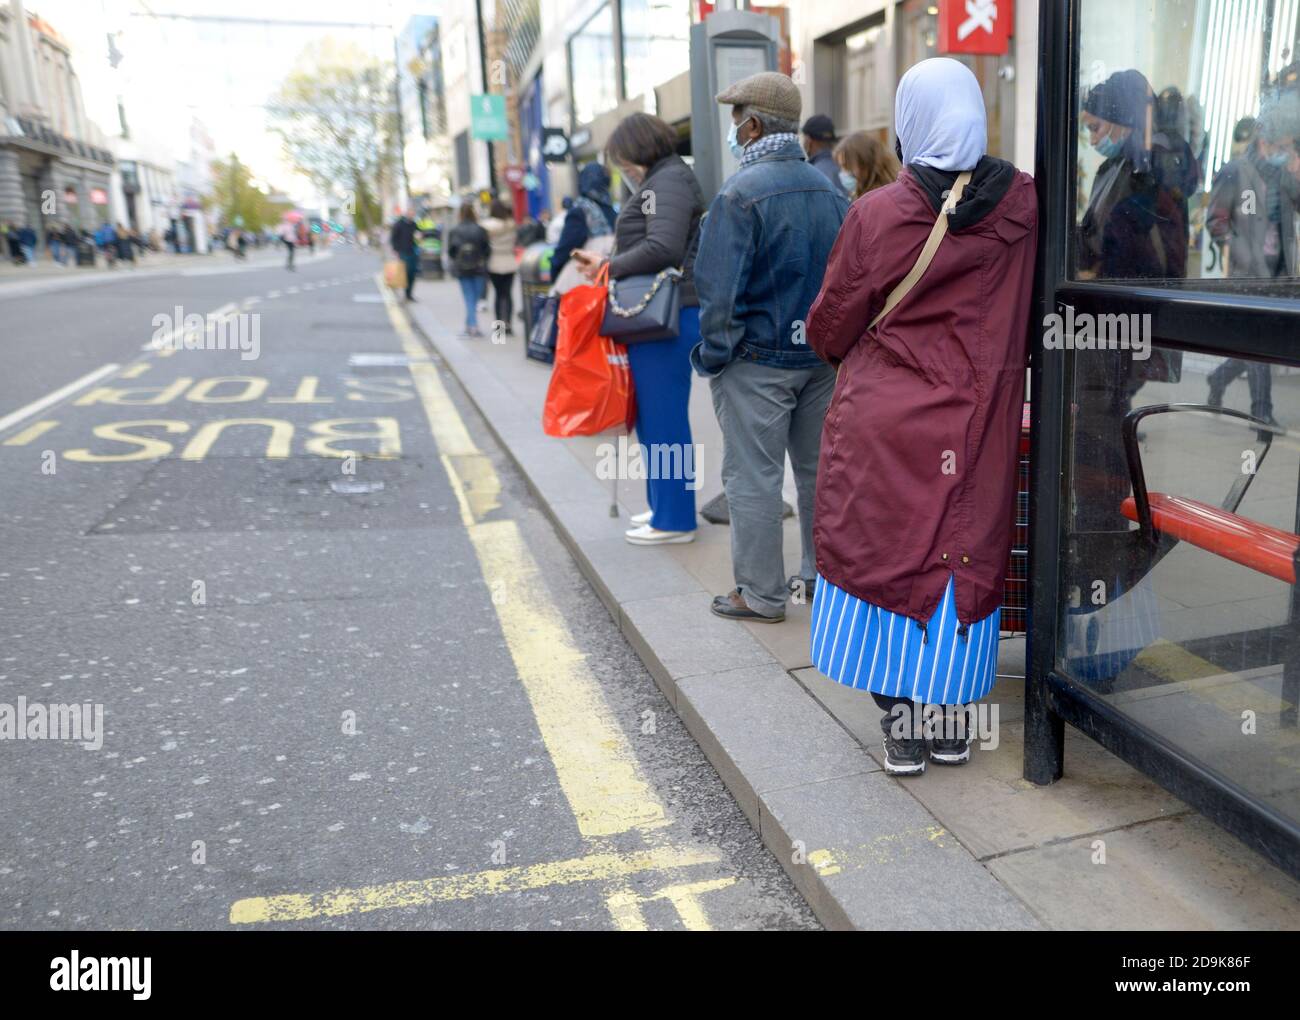 London, England, UK. People waiting at a bus stop in Oxford Street Stock Photo